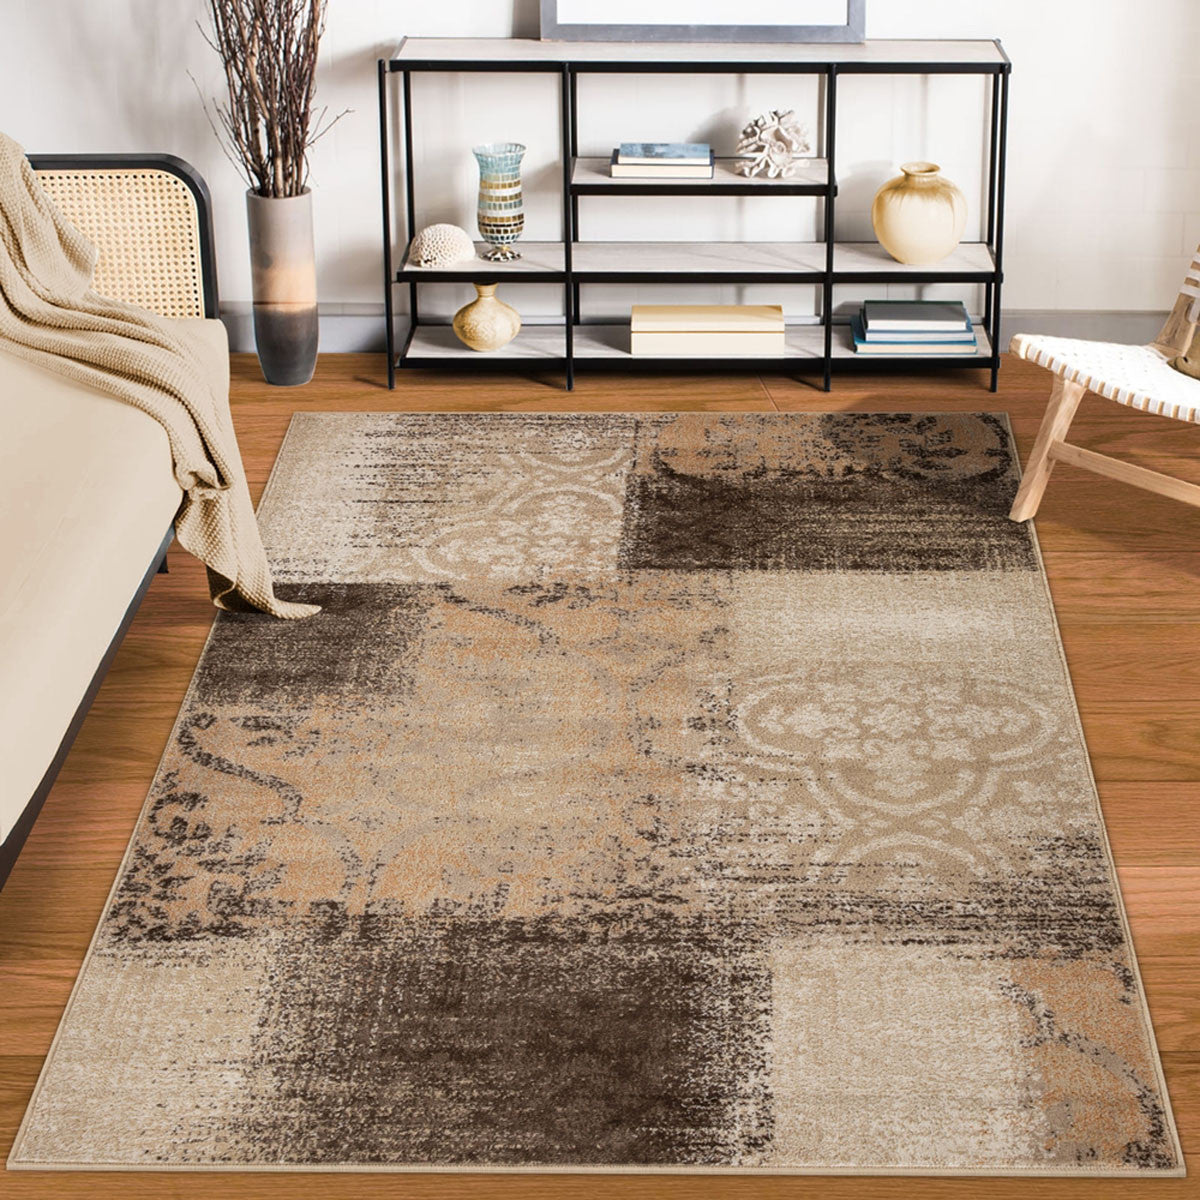 5' X 8' Beige Gray And Black Damask Distressed Stain Resistant Area Rug